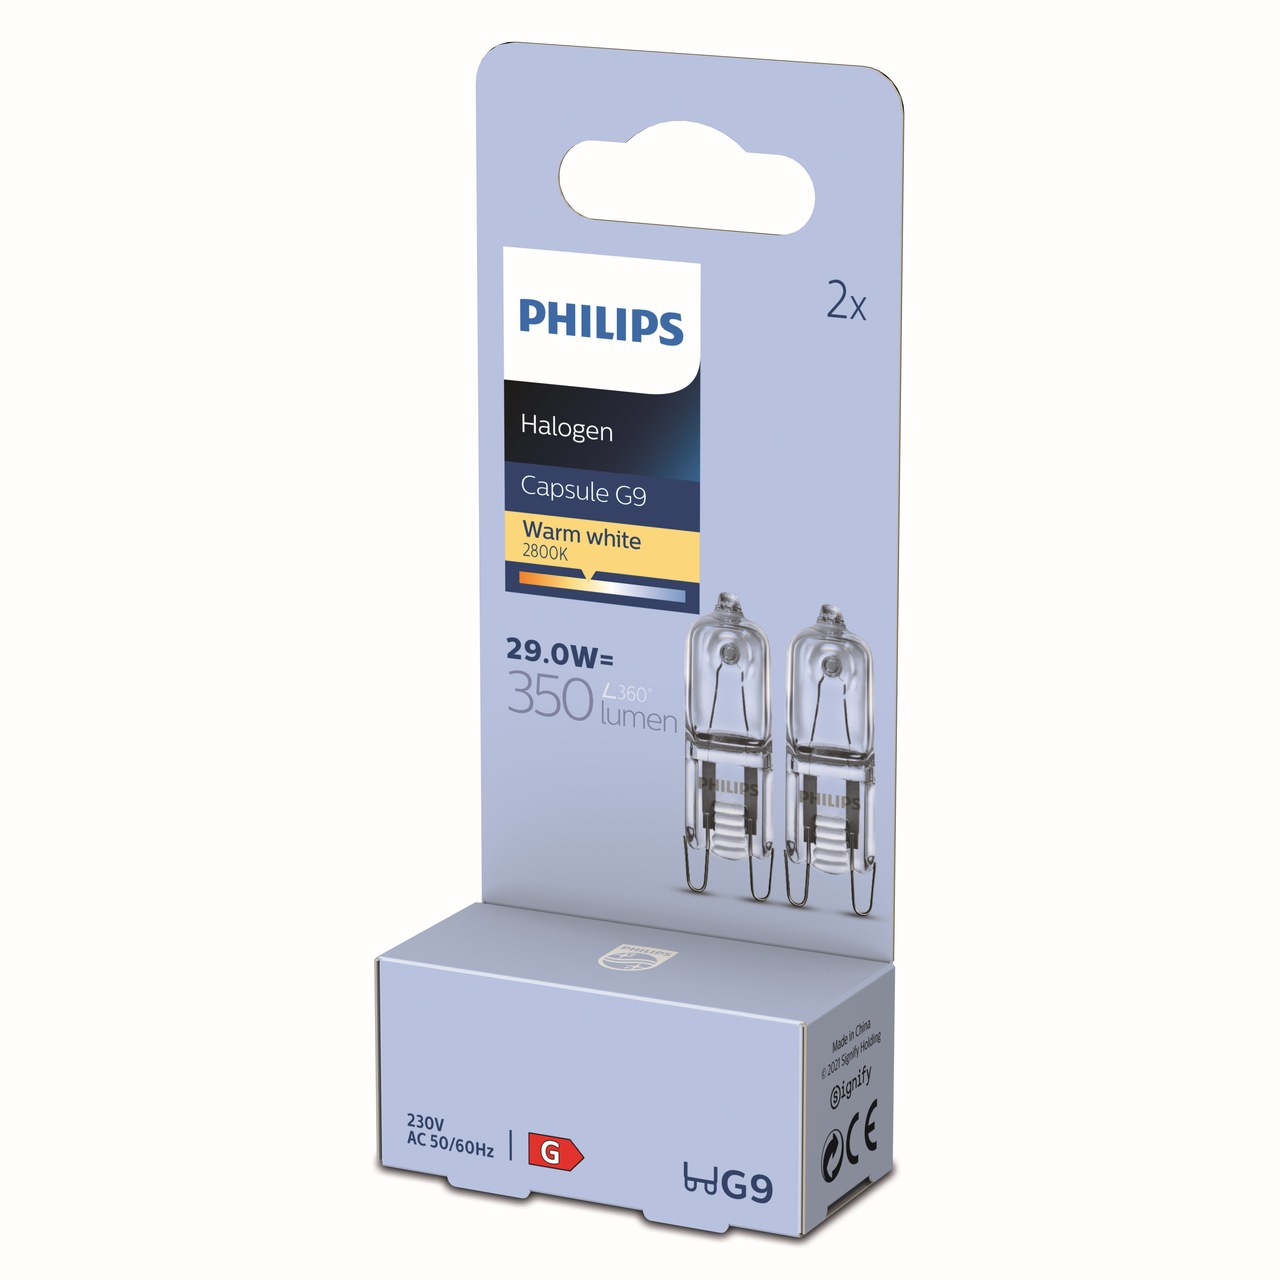 PHILIPS Halo Linear Halogen Stab R7s, 140.0 W, 3000 K, 2646 lm, 118 mm, dimmbar